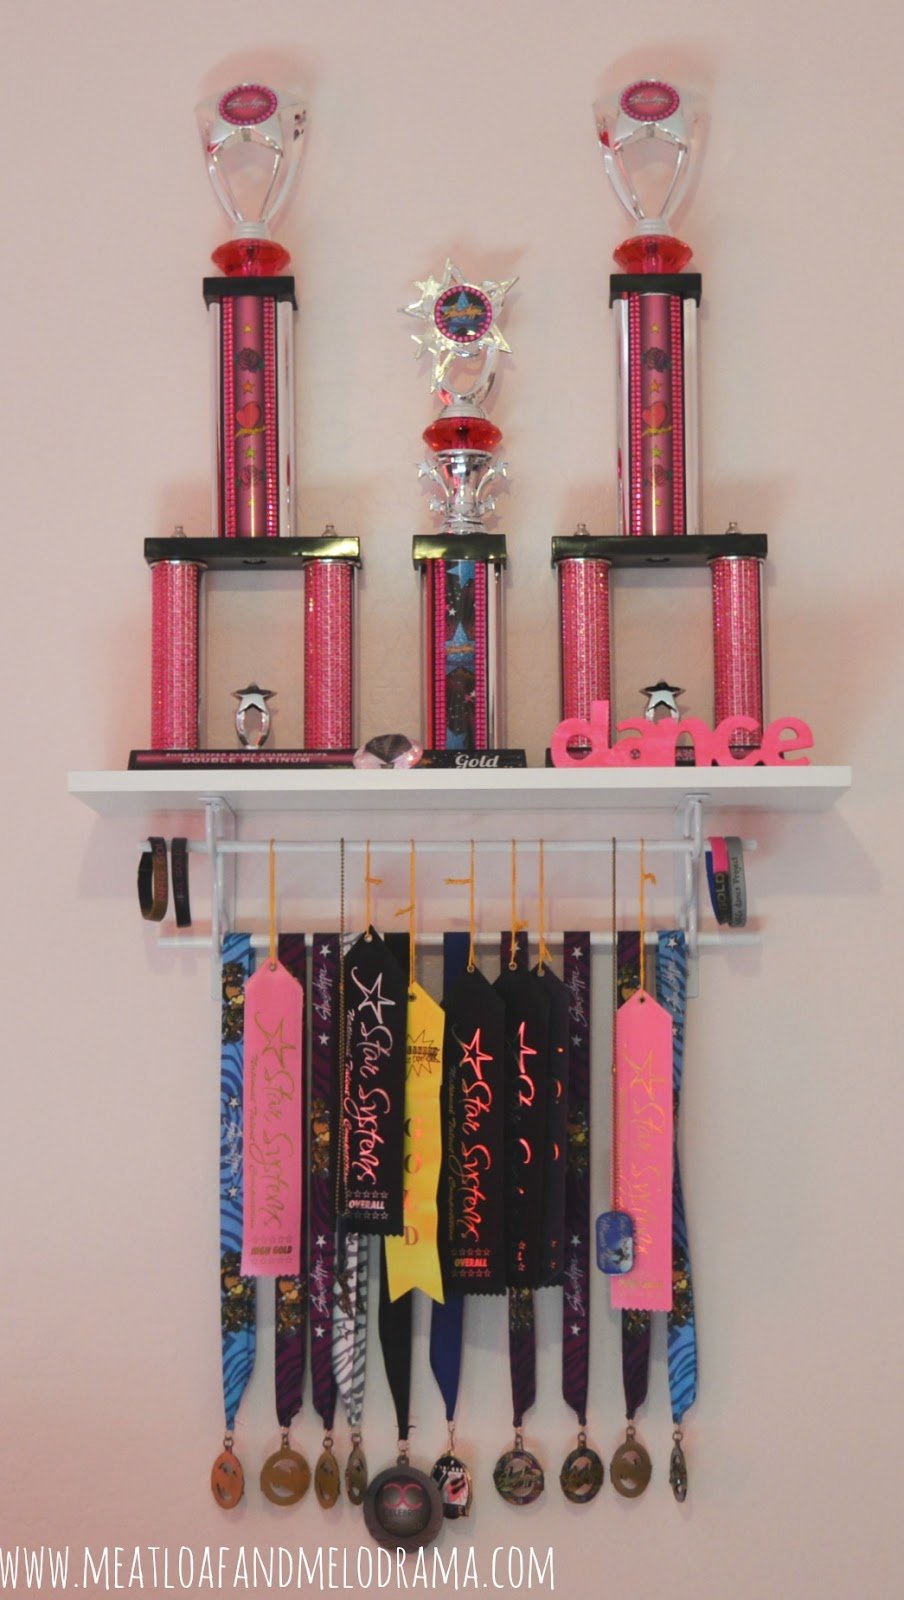 dance trophy shelf made from dowels and ready made shelves